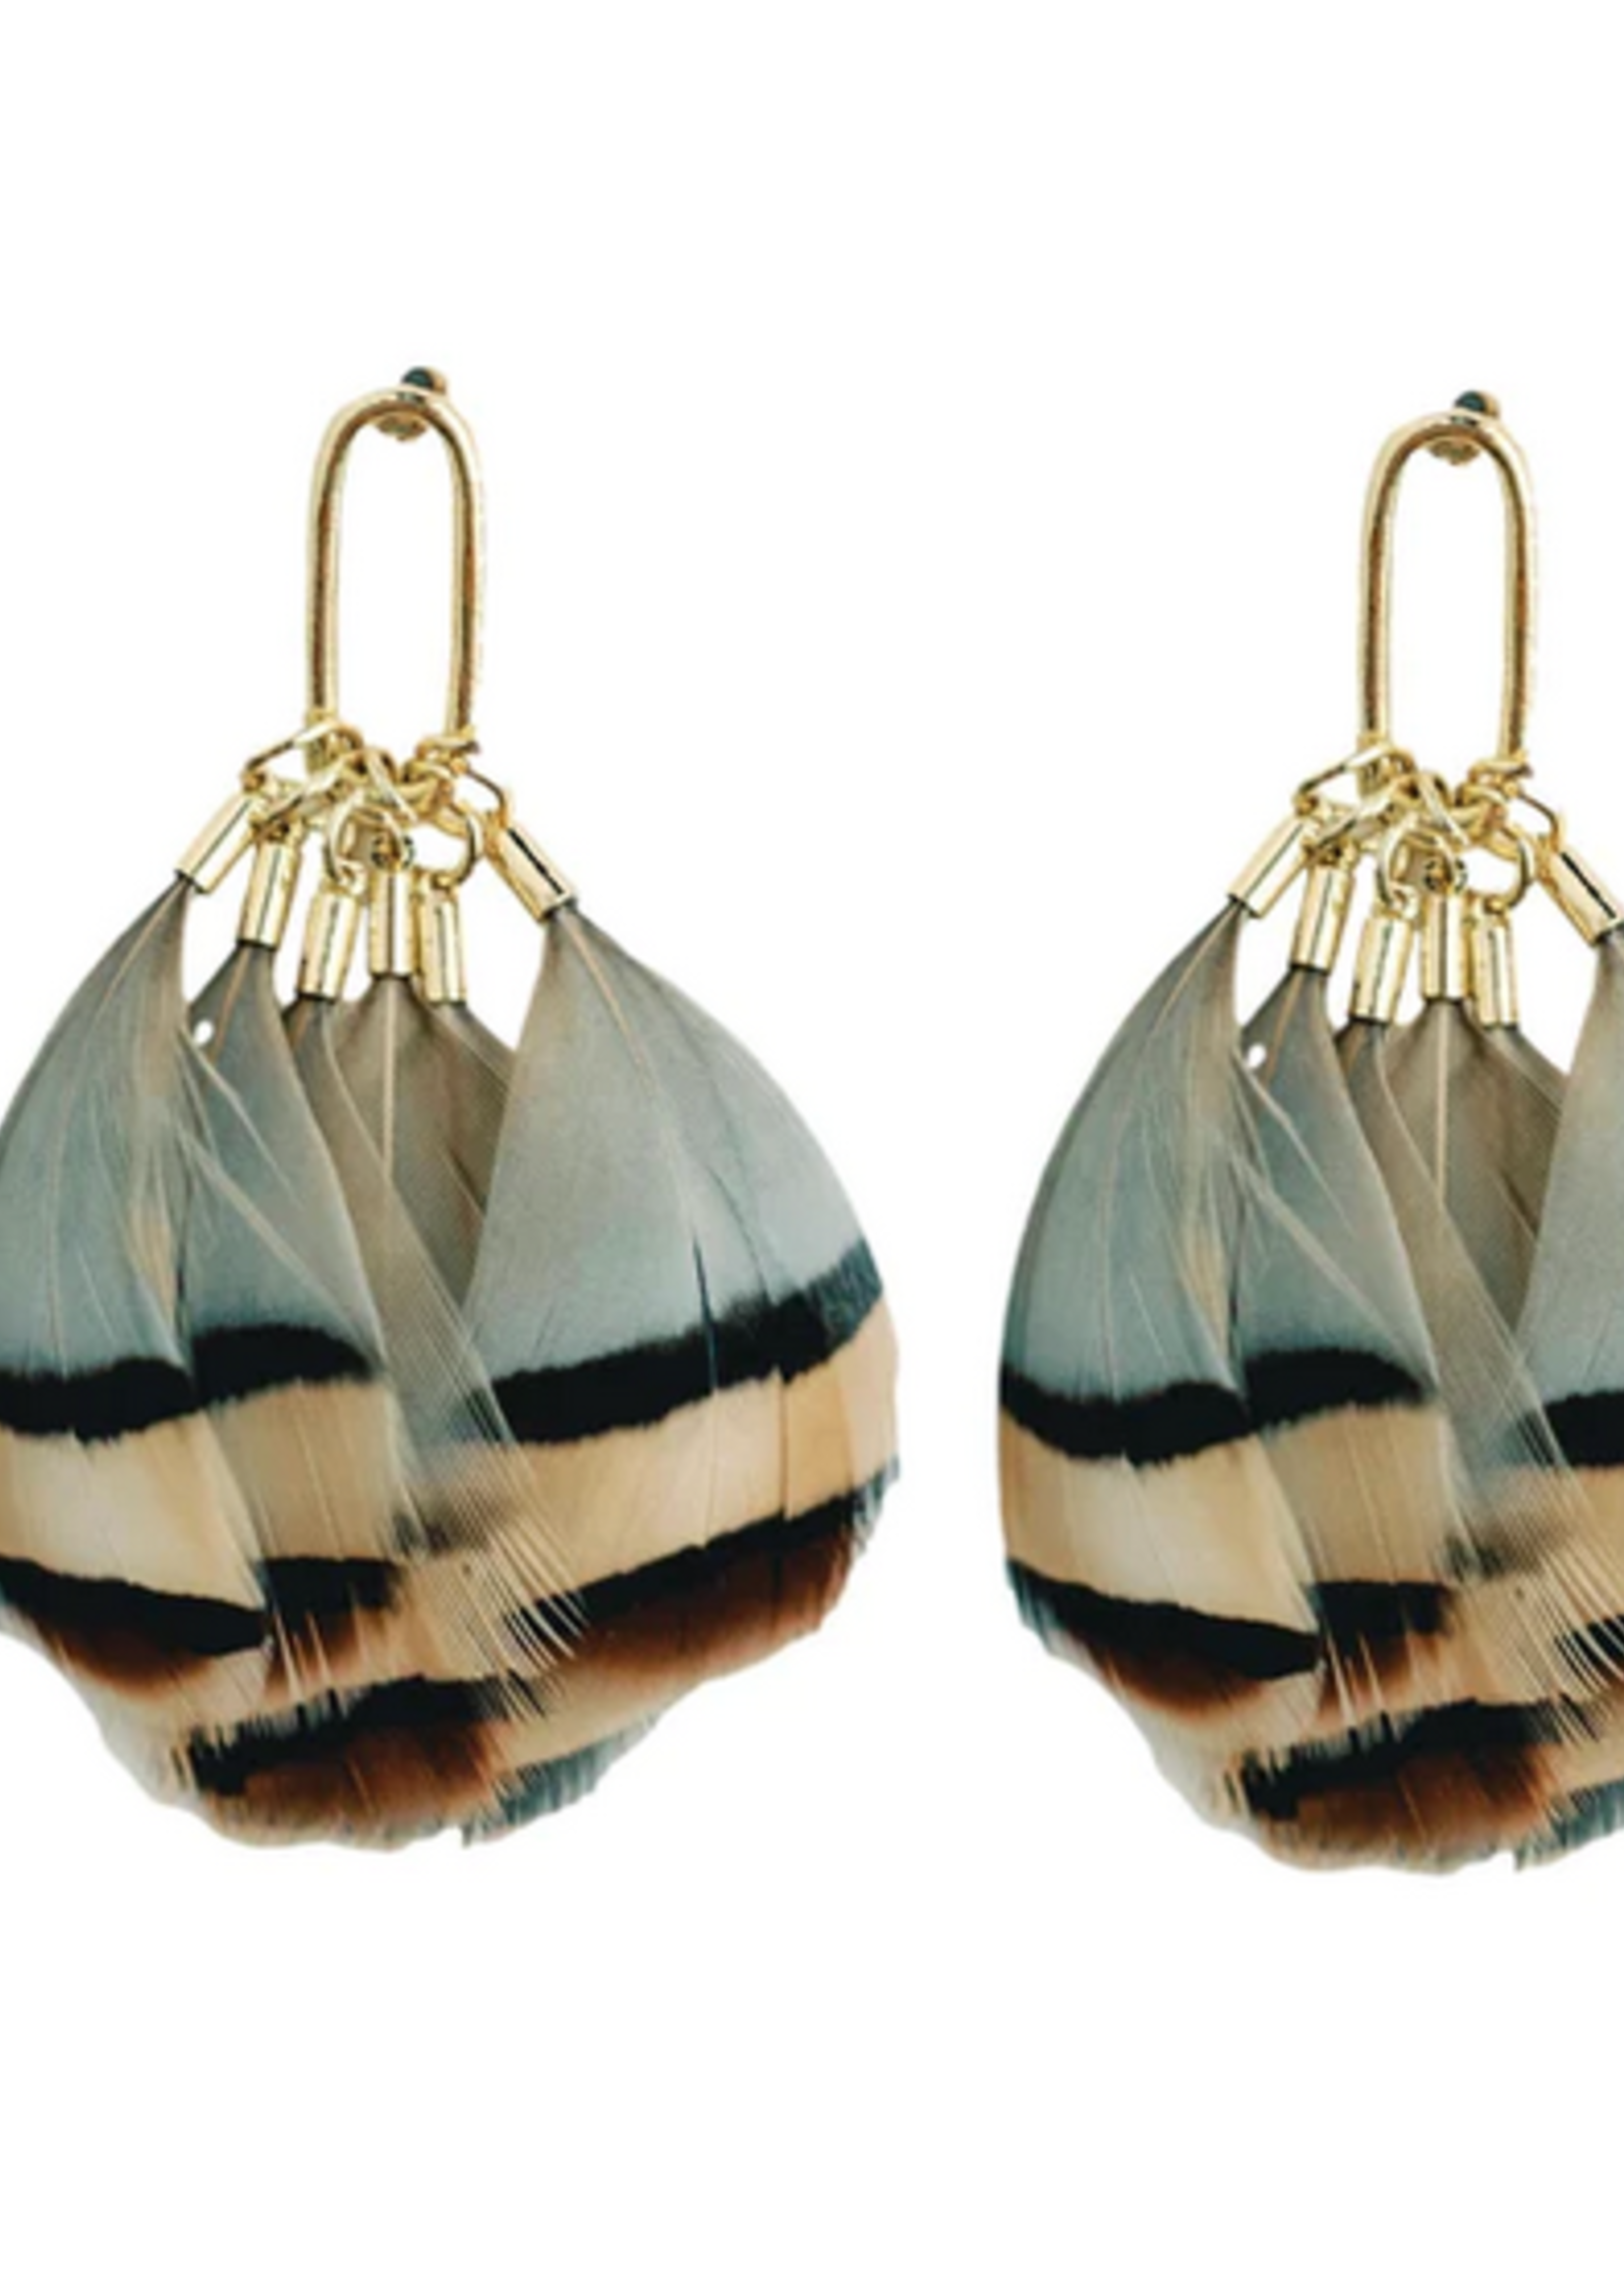 ST. ARMANDS OF DESIGNS OF SARASOTA BROWN STRIPED FEATHER STATEMENT EARRINGS